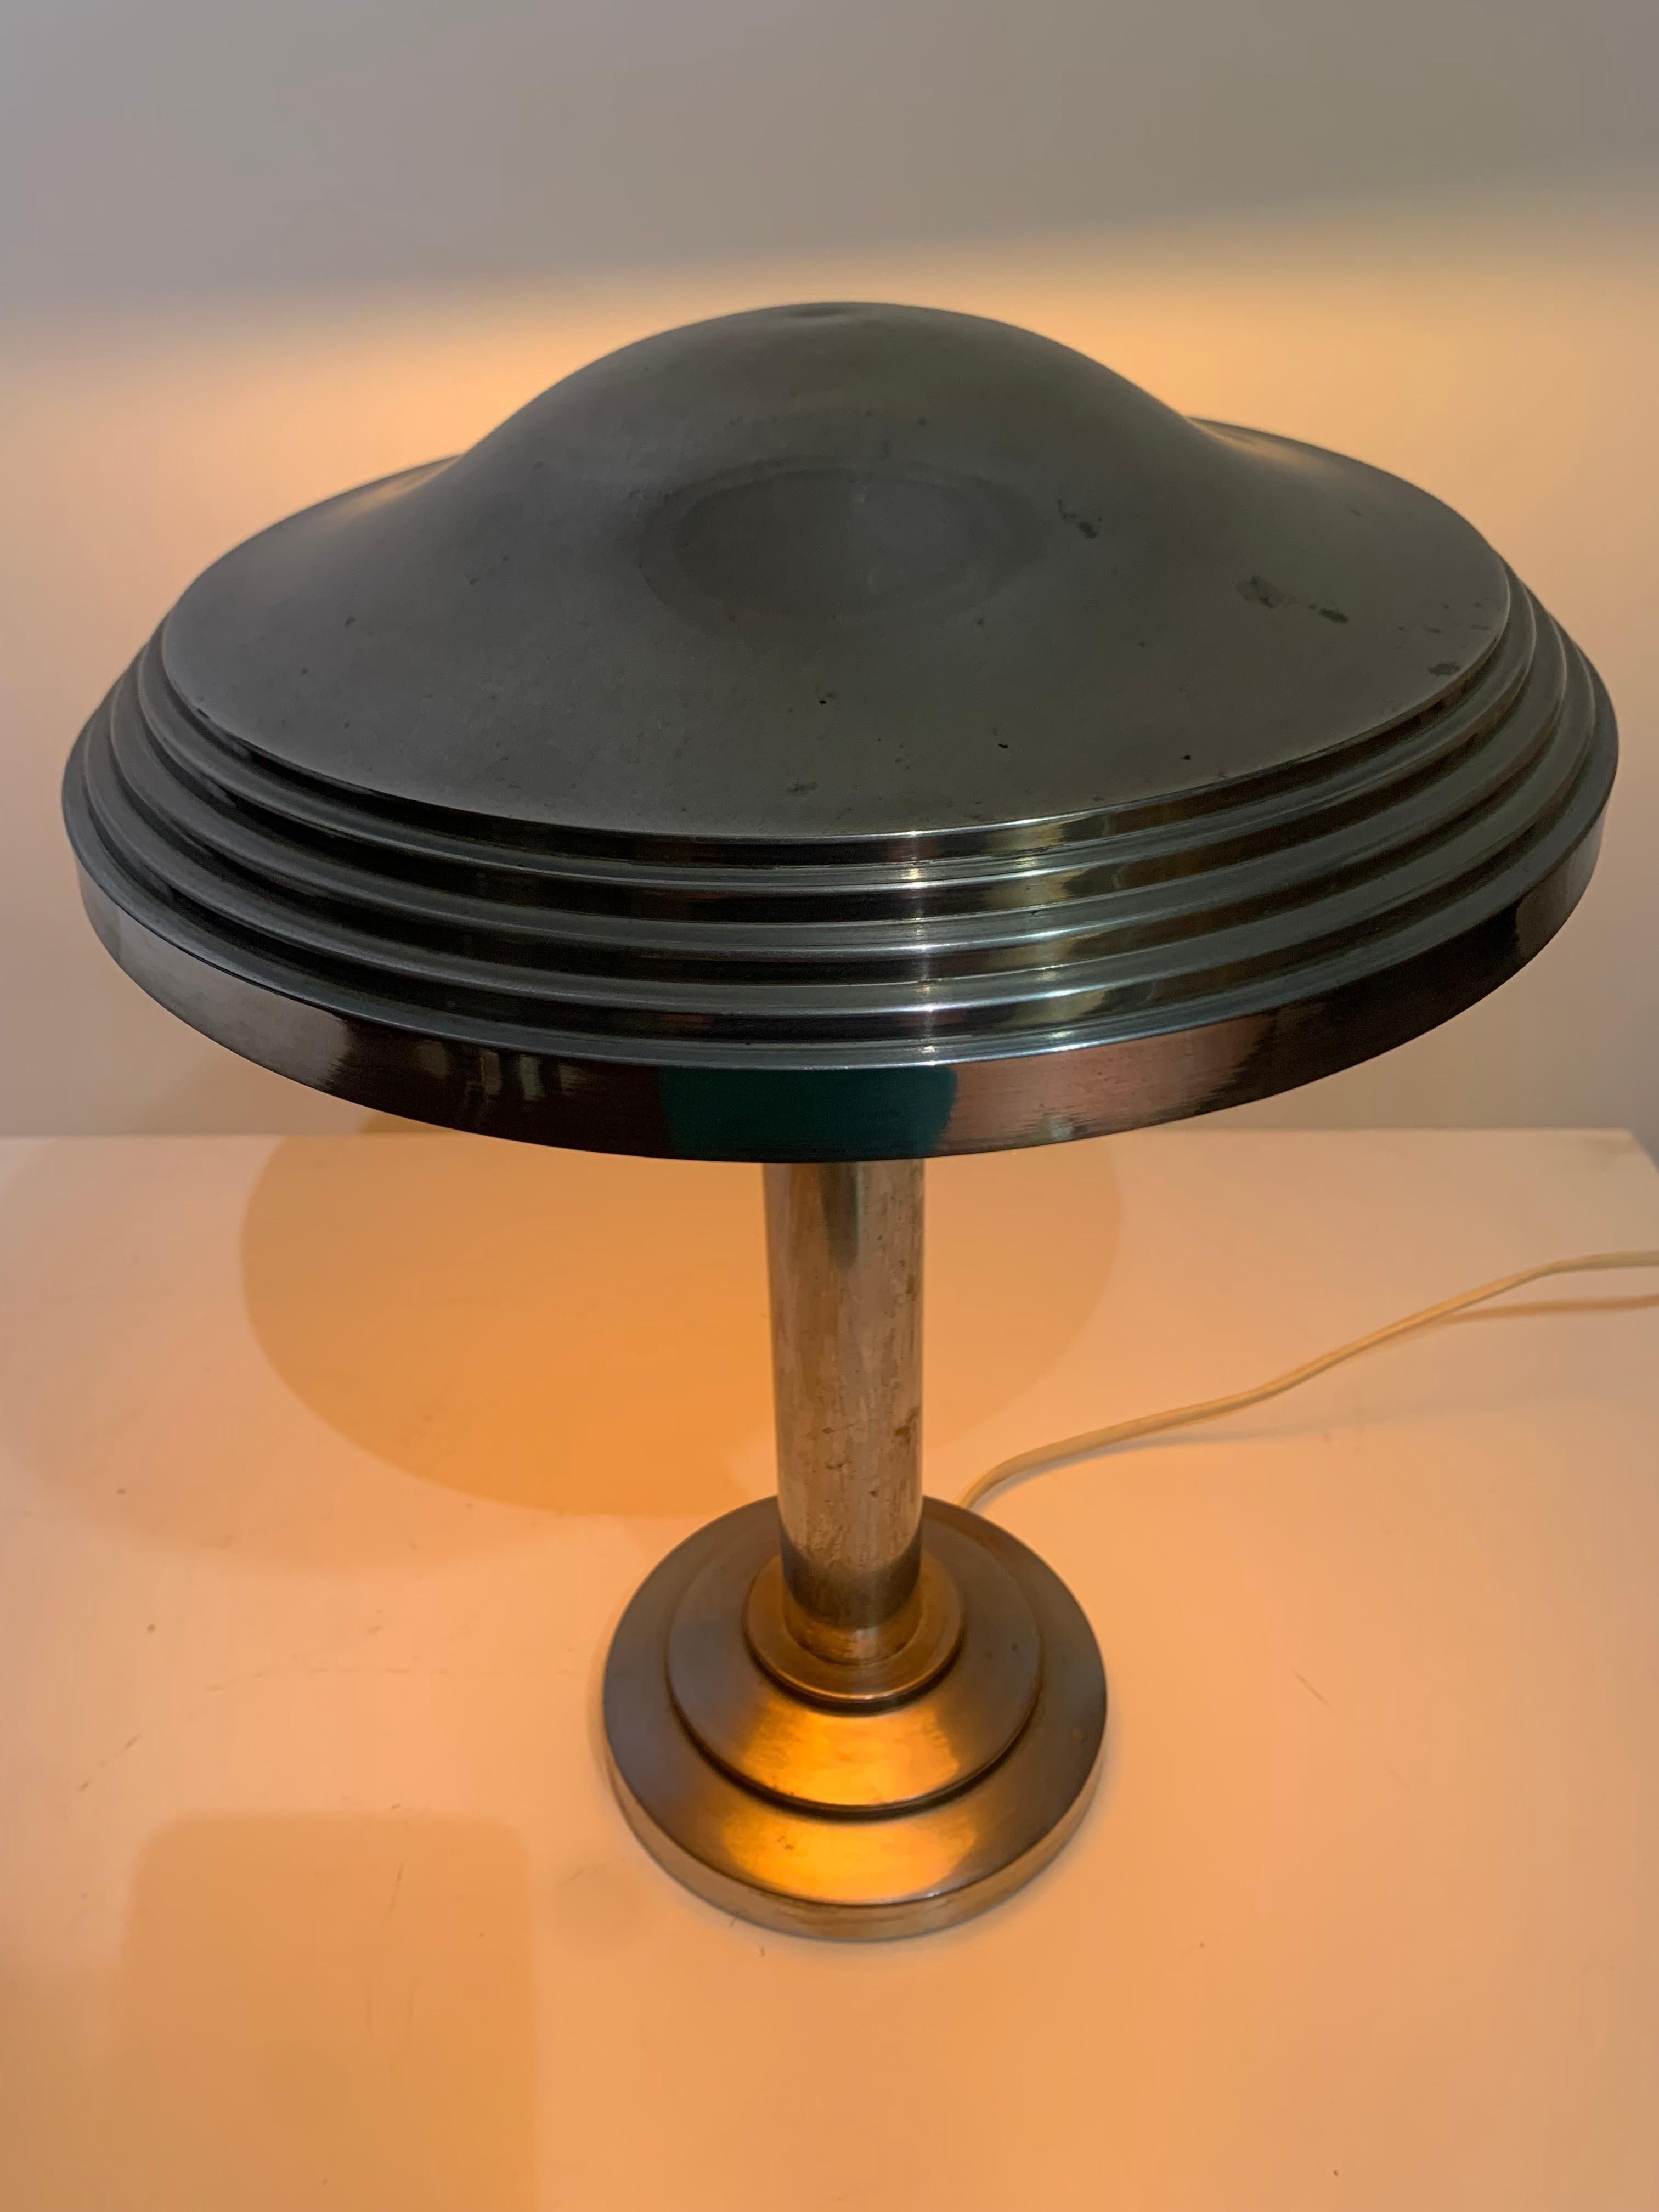 An Atomic Age/Art-Deco table or desk lamp with an attached saucer shade mad from chrome-plated steel.
Typical item from the mid-century, this lamp is a statement piece and is absolutely gorgeous. 
The lamp has been rewired with new chords by a